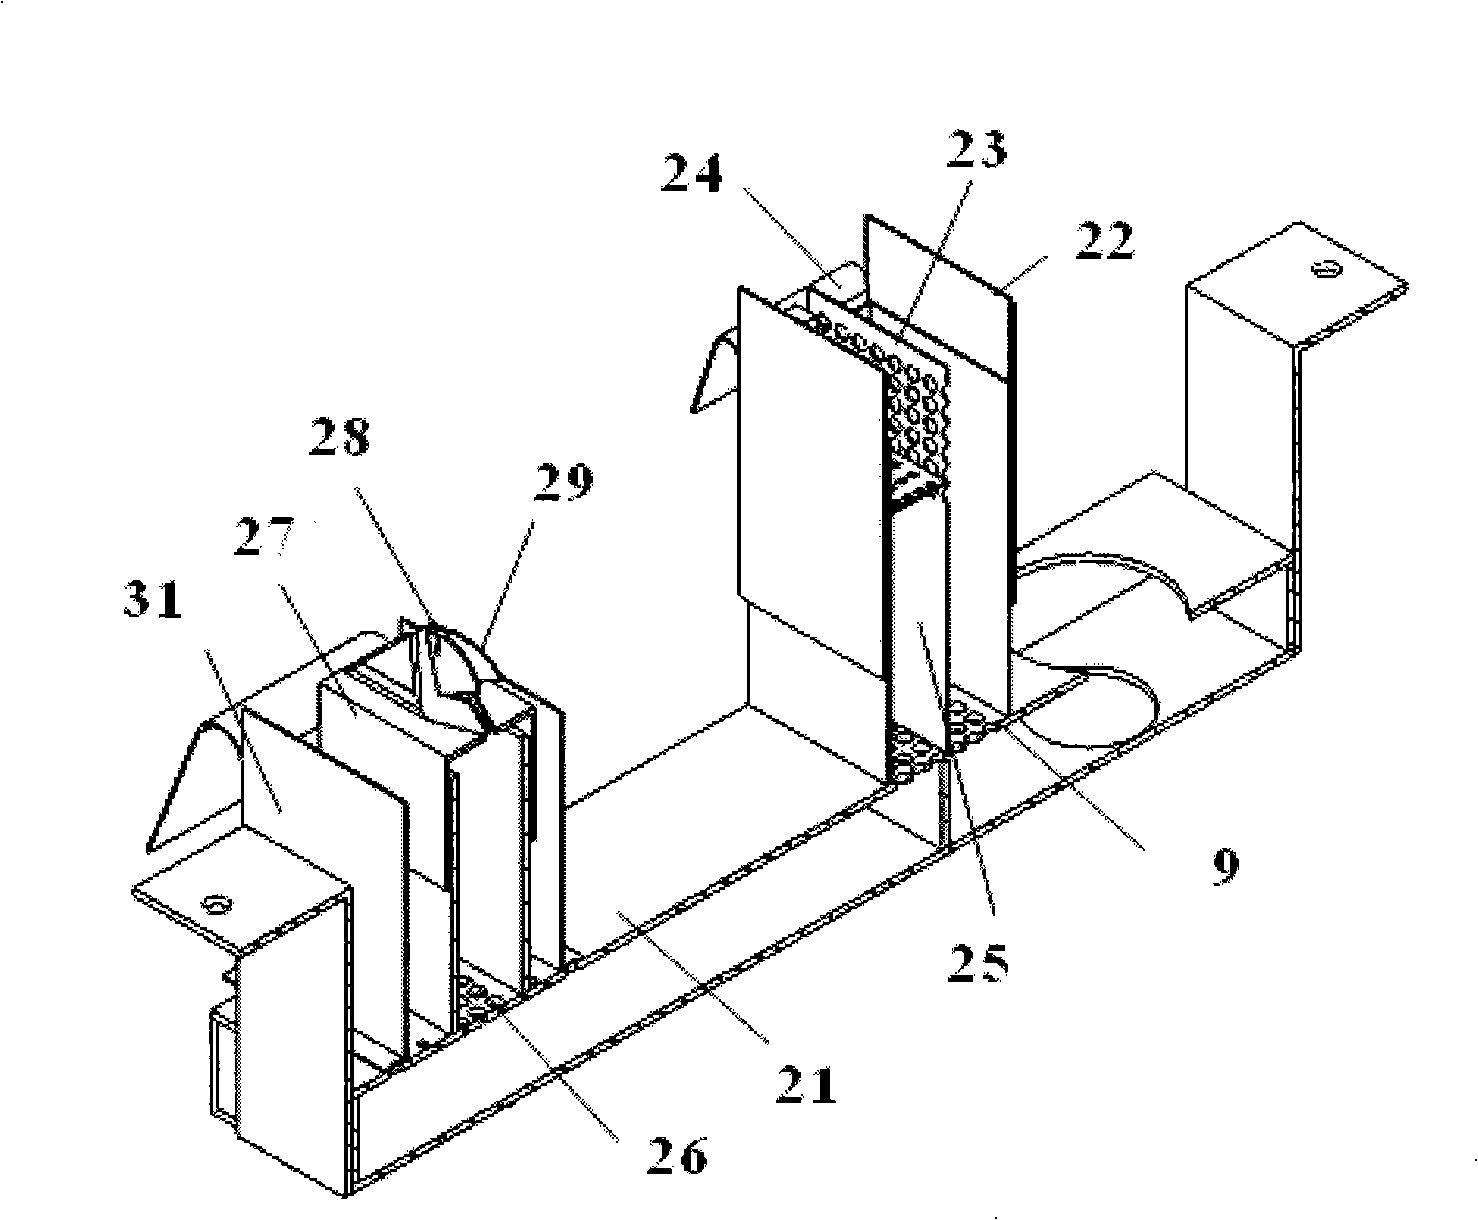 Reaction jet welding device and uses thereof